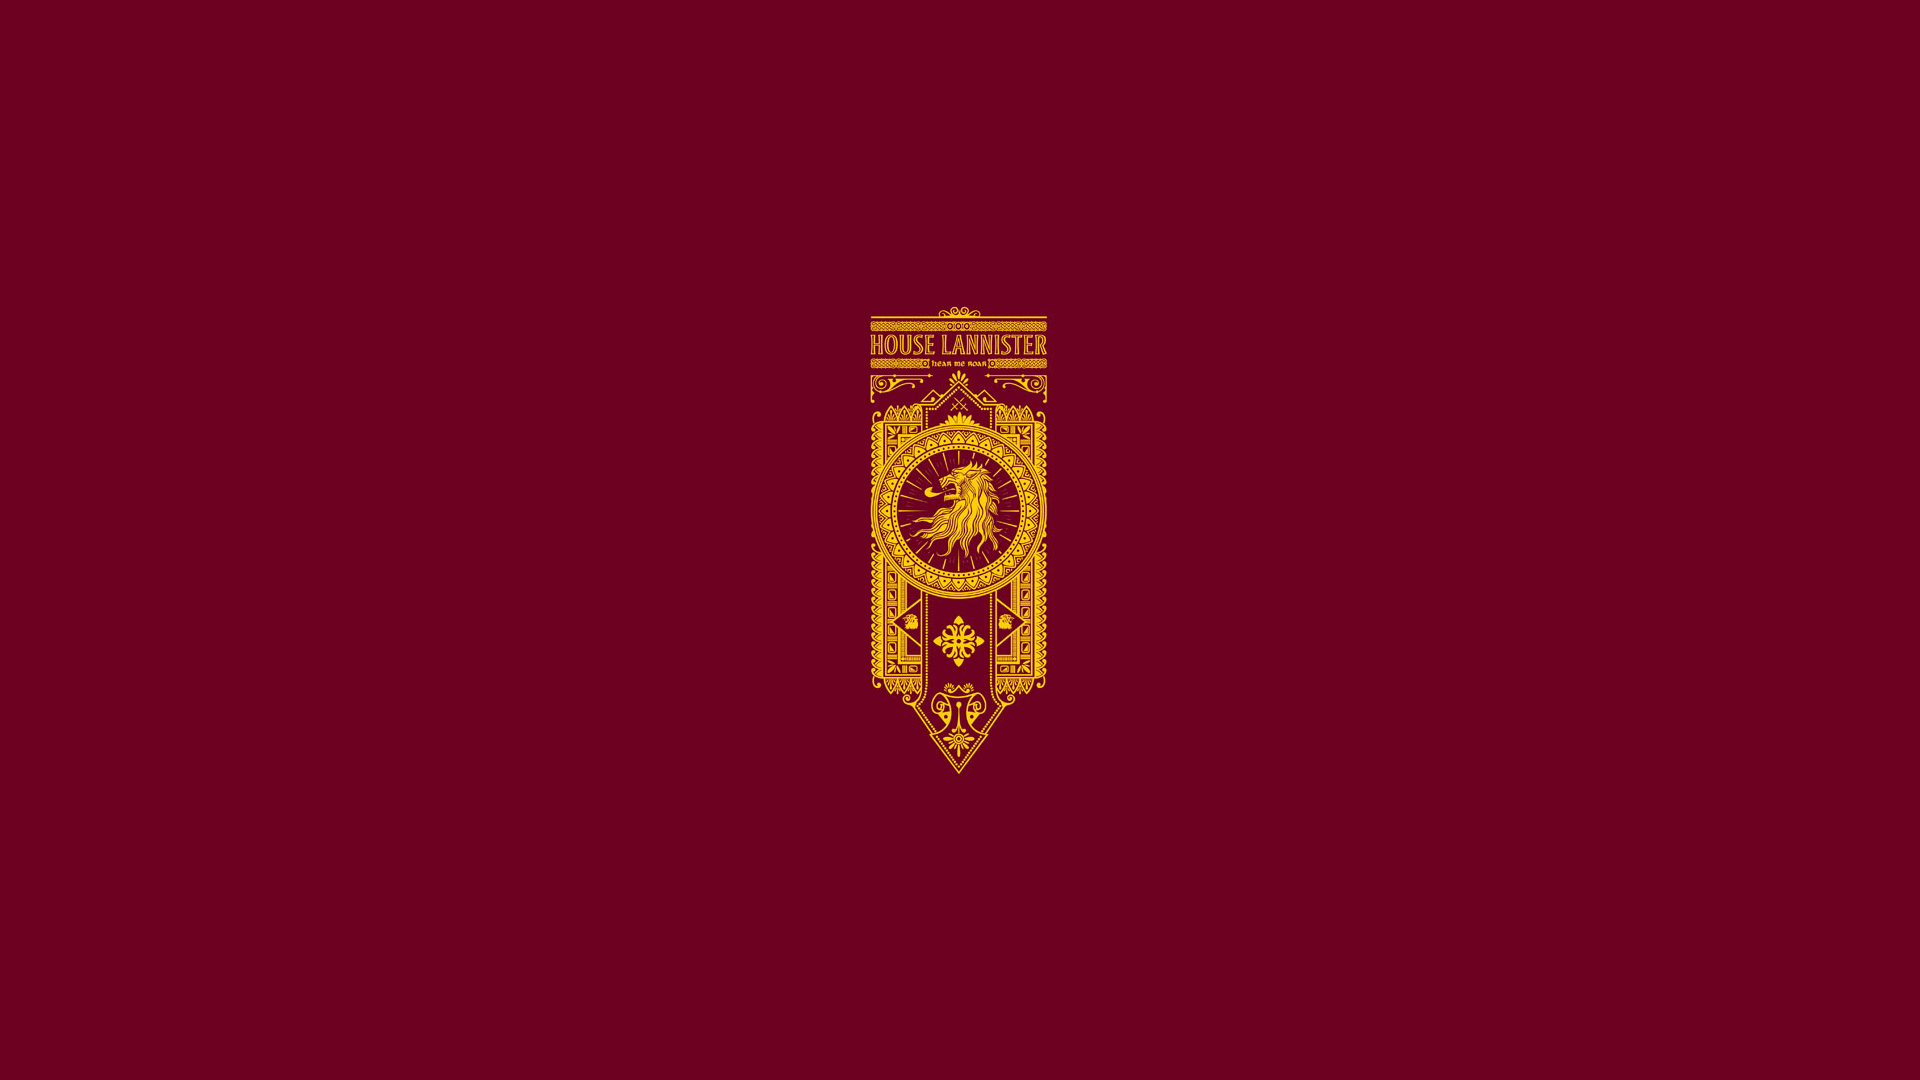 Game of Thrones banners wallpaper • meh.ro